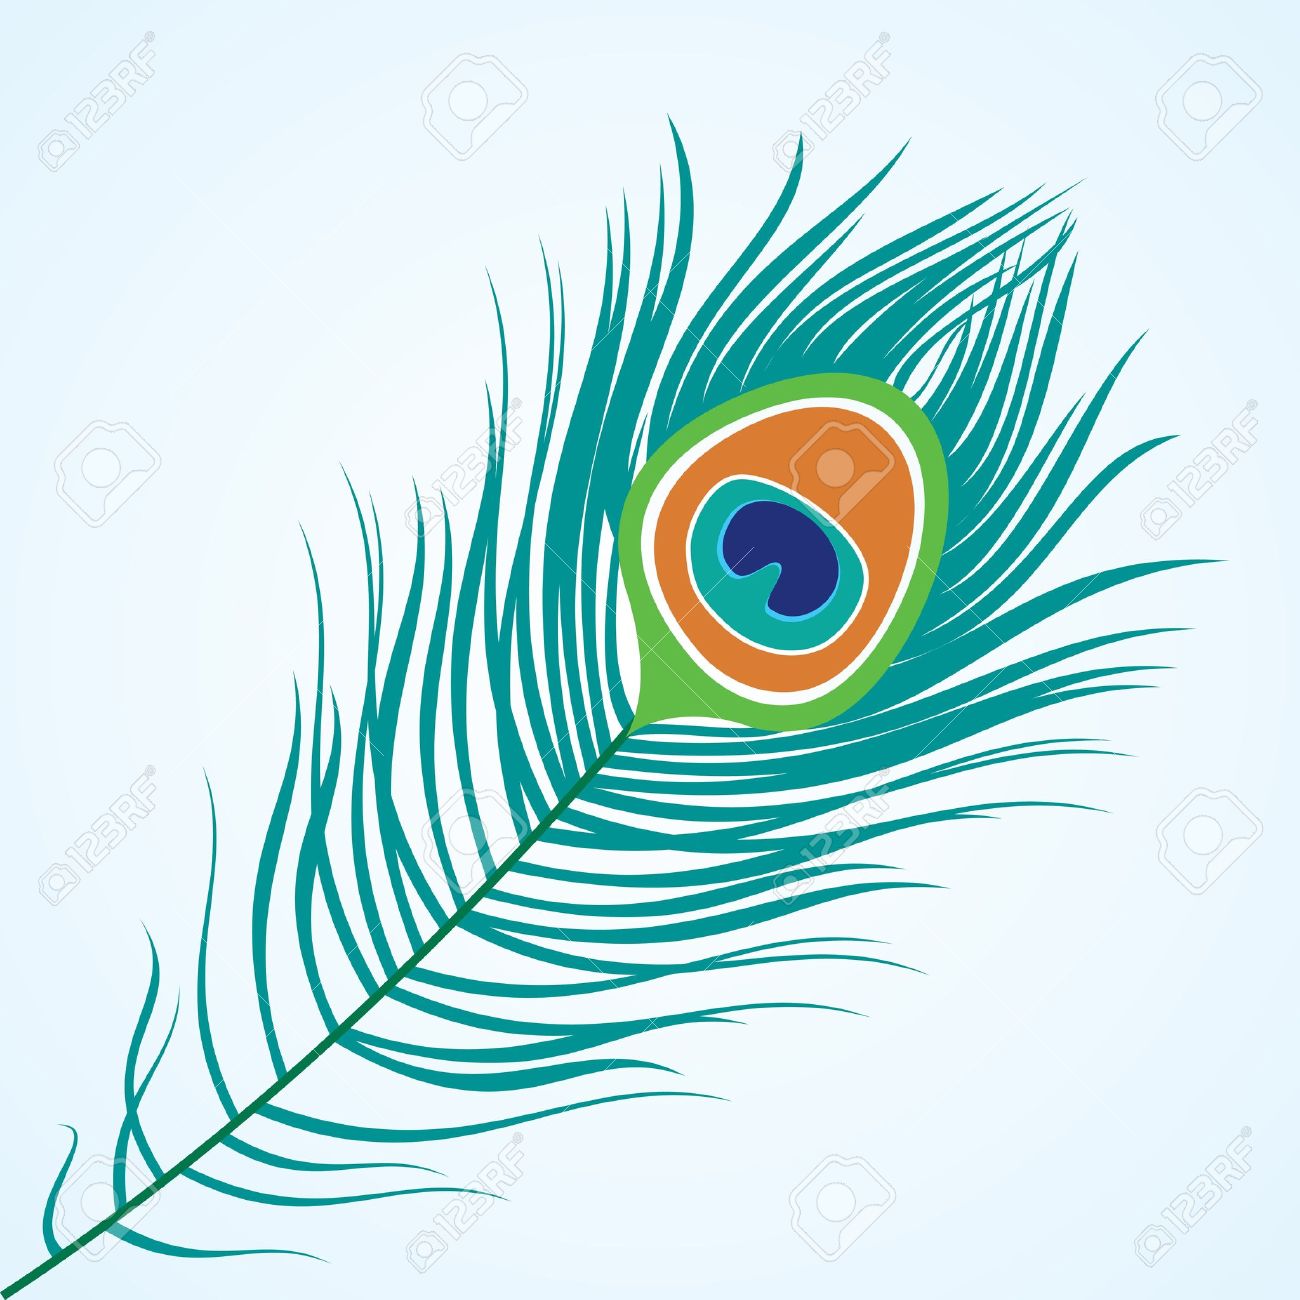 peacock: Vector isolated peacock feather Illustration